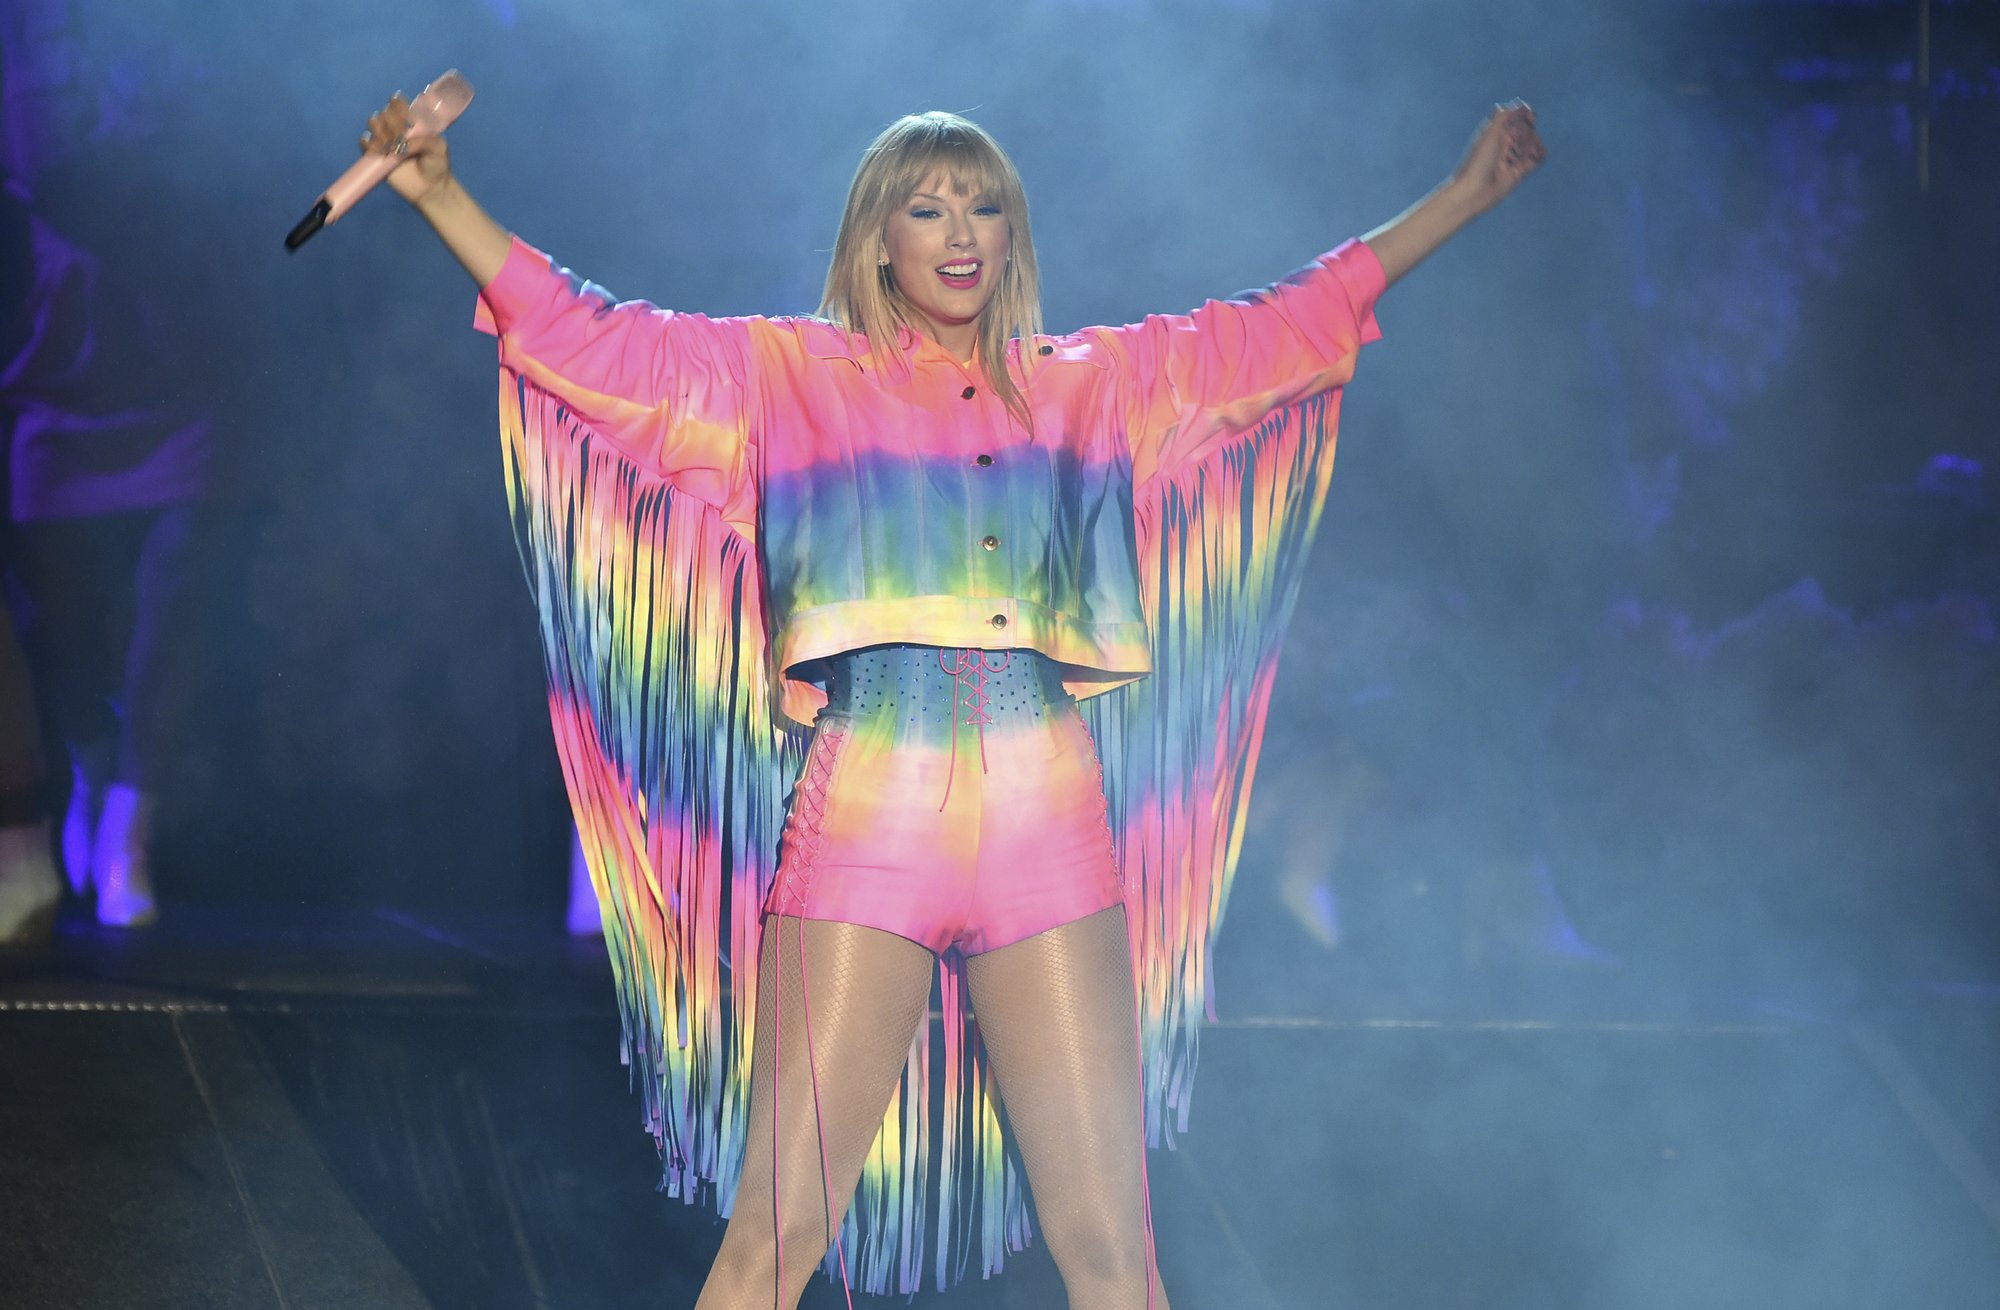 A (Taylor) Swift reaction: The Chiefs have replaced Cowboys as